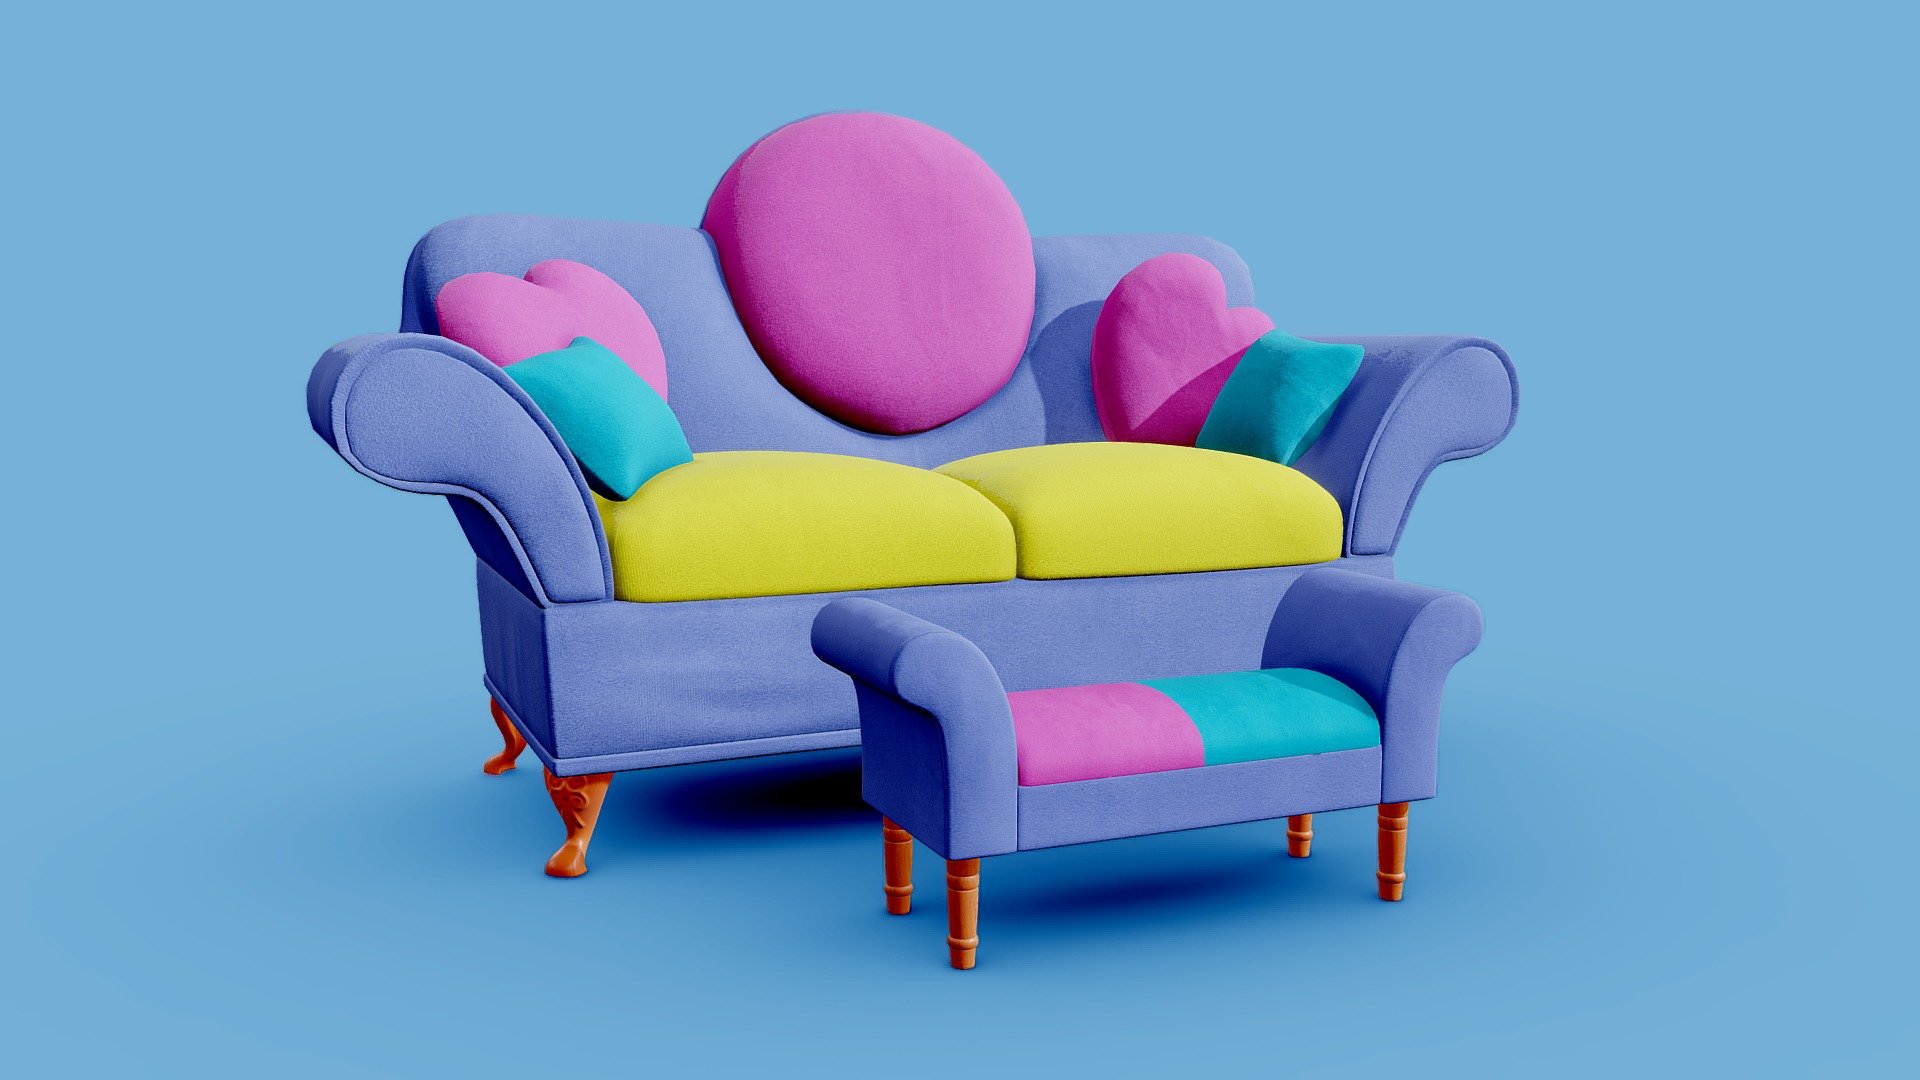 Immerse yourself in a world of fantasy with this Barbie-toned sofa, a tribute to Barbiecore style. With its bright pink design and pastel accents, this sofa is a dream come true for lovers of playfulness and extravagance. The matching footrest completes the set, inviting you to relax with a touch of glamour. A piece of furniture that will bring your space to life with the magic of the Barbie world.

My Store
https://sketchfab.com/JoRCS/store




Include additional files

Obj and Fbx fotmat. High-quality PBR textures in png format

4k textures
 - Barbiecore sofa & footrest in Barbie tones 3d model